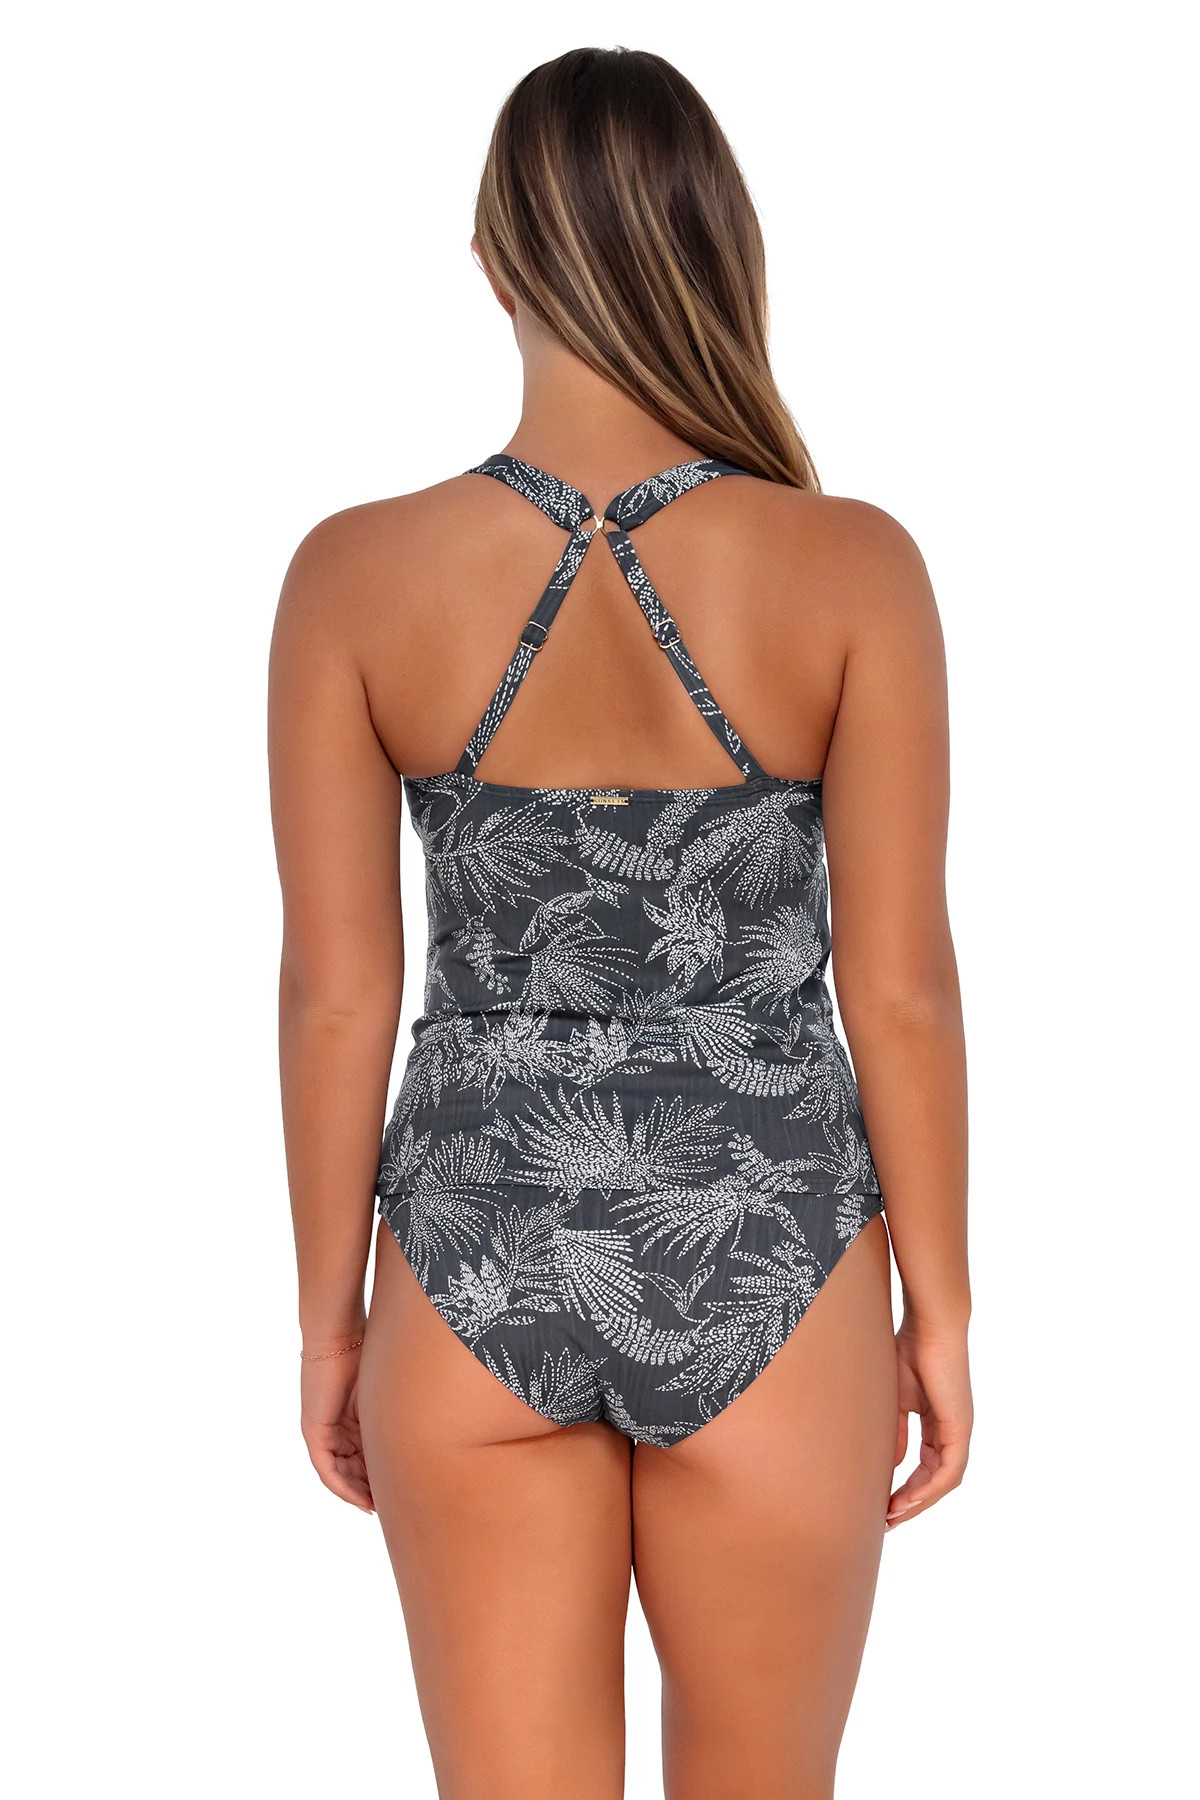 FANFARE SEAGRASS TEXTURE Elsie Underwire Tankini Top (D+ Cup) image number 3